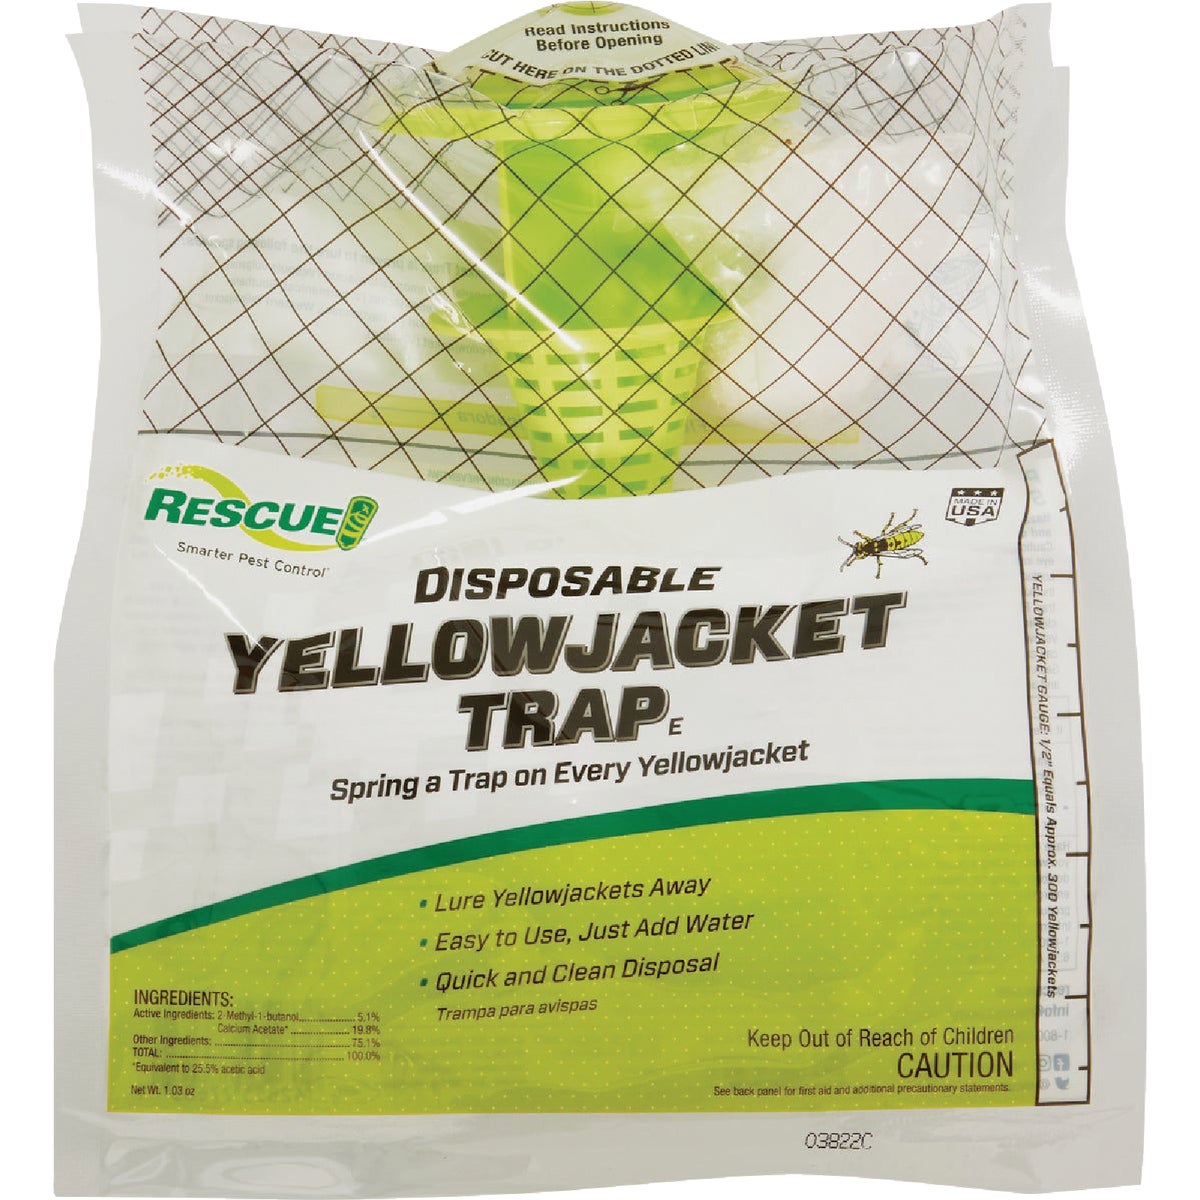 Item 740067, Yellow jacket trap for areas in the Eastern and Central time zones.